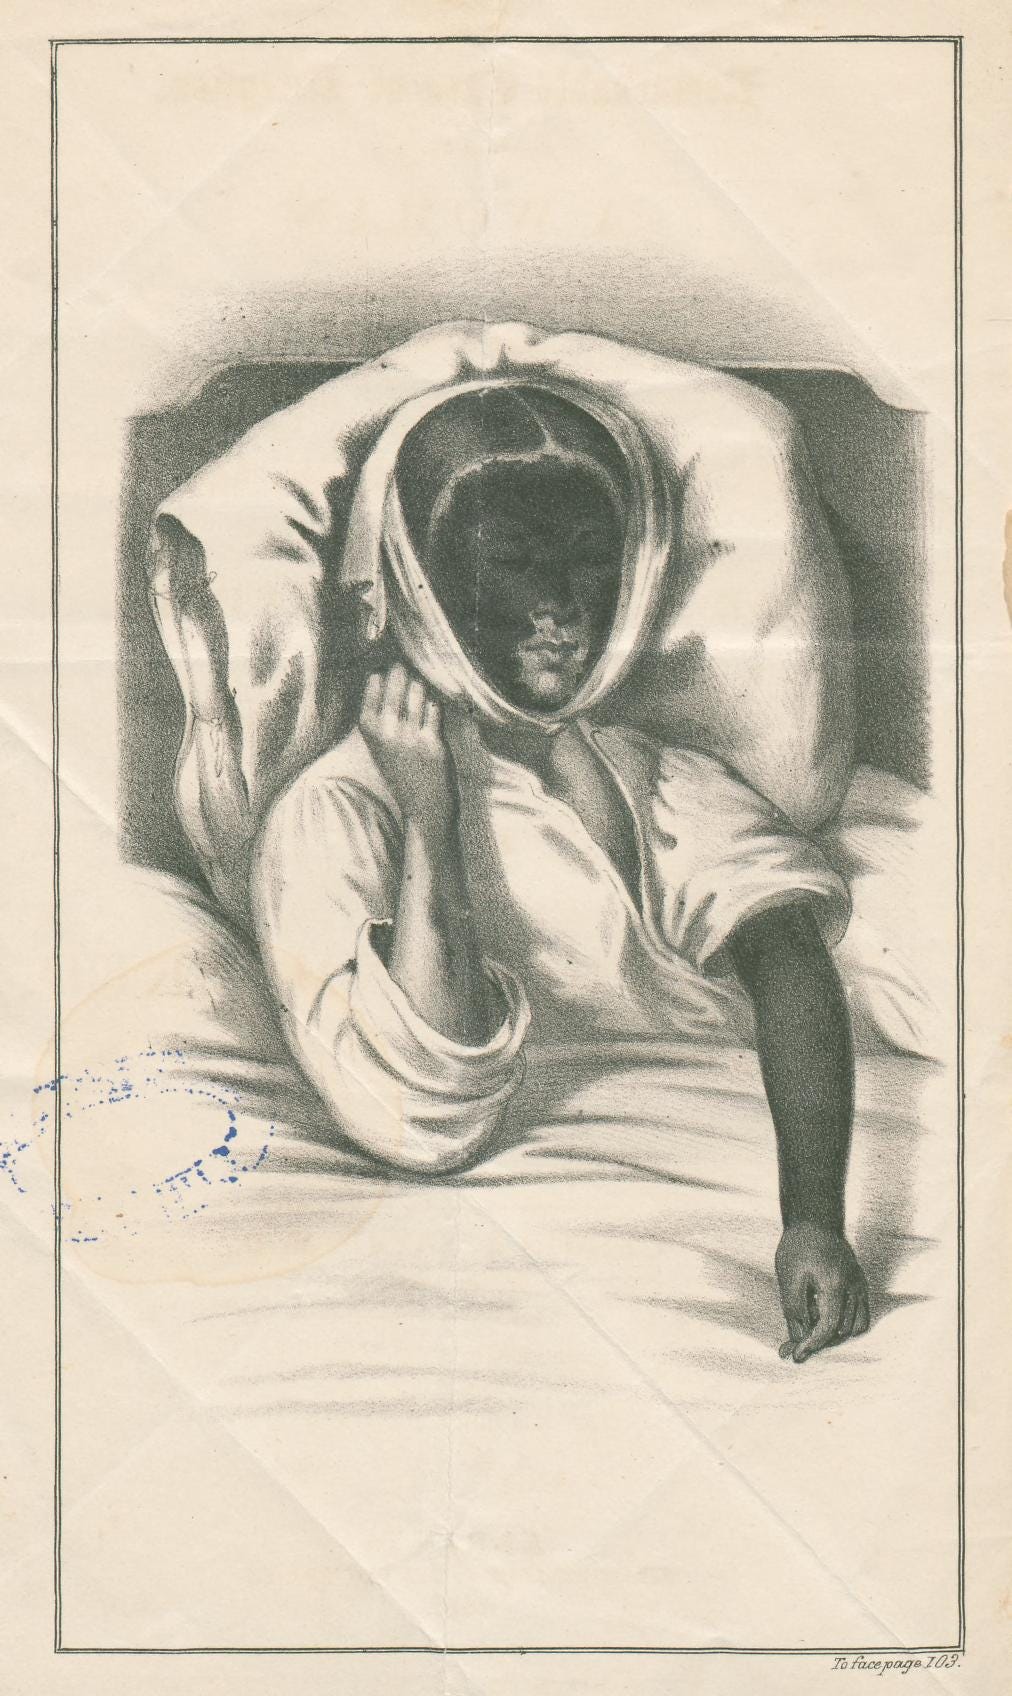 A drawing of a woman sitting up in a bed, surrounded by white linen. She has her eyes closed and her face and left arm are a dark colour, apart from the area around her lips, which shows lighter skin.